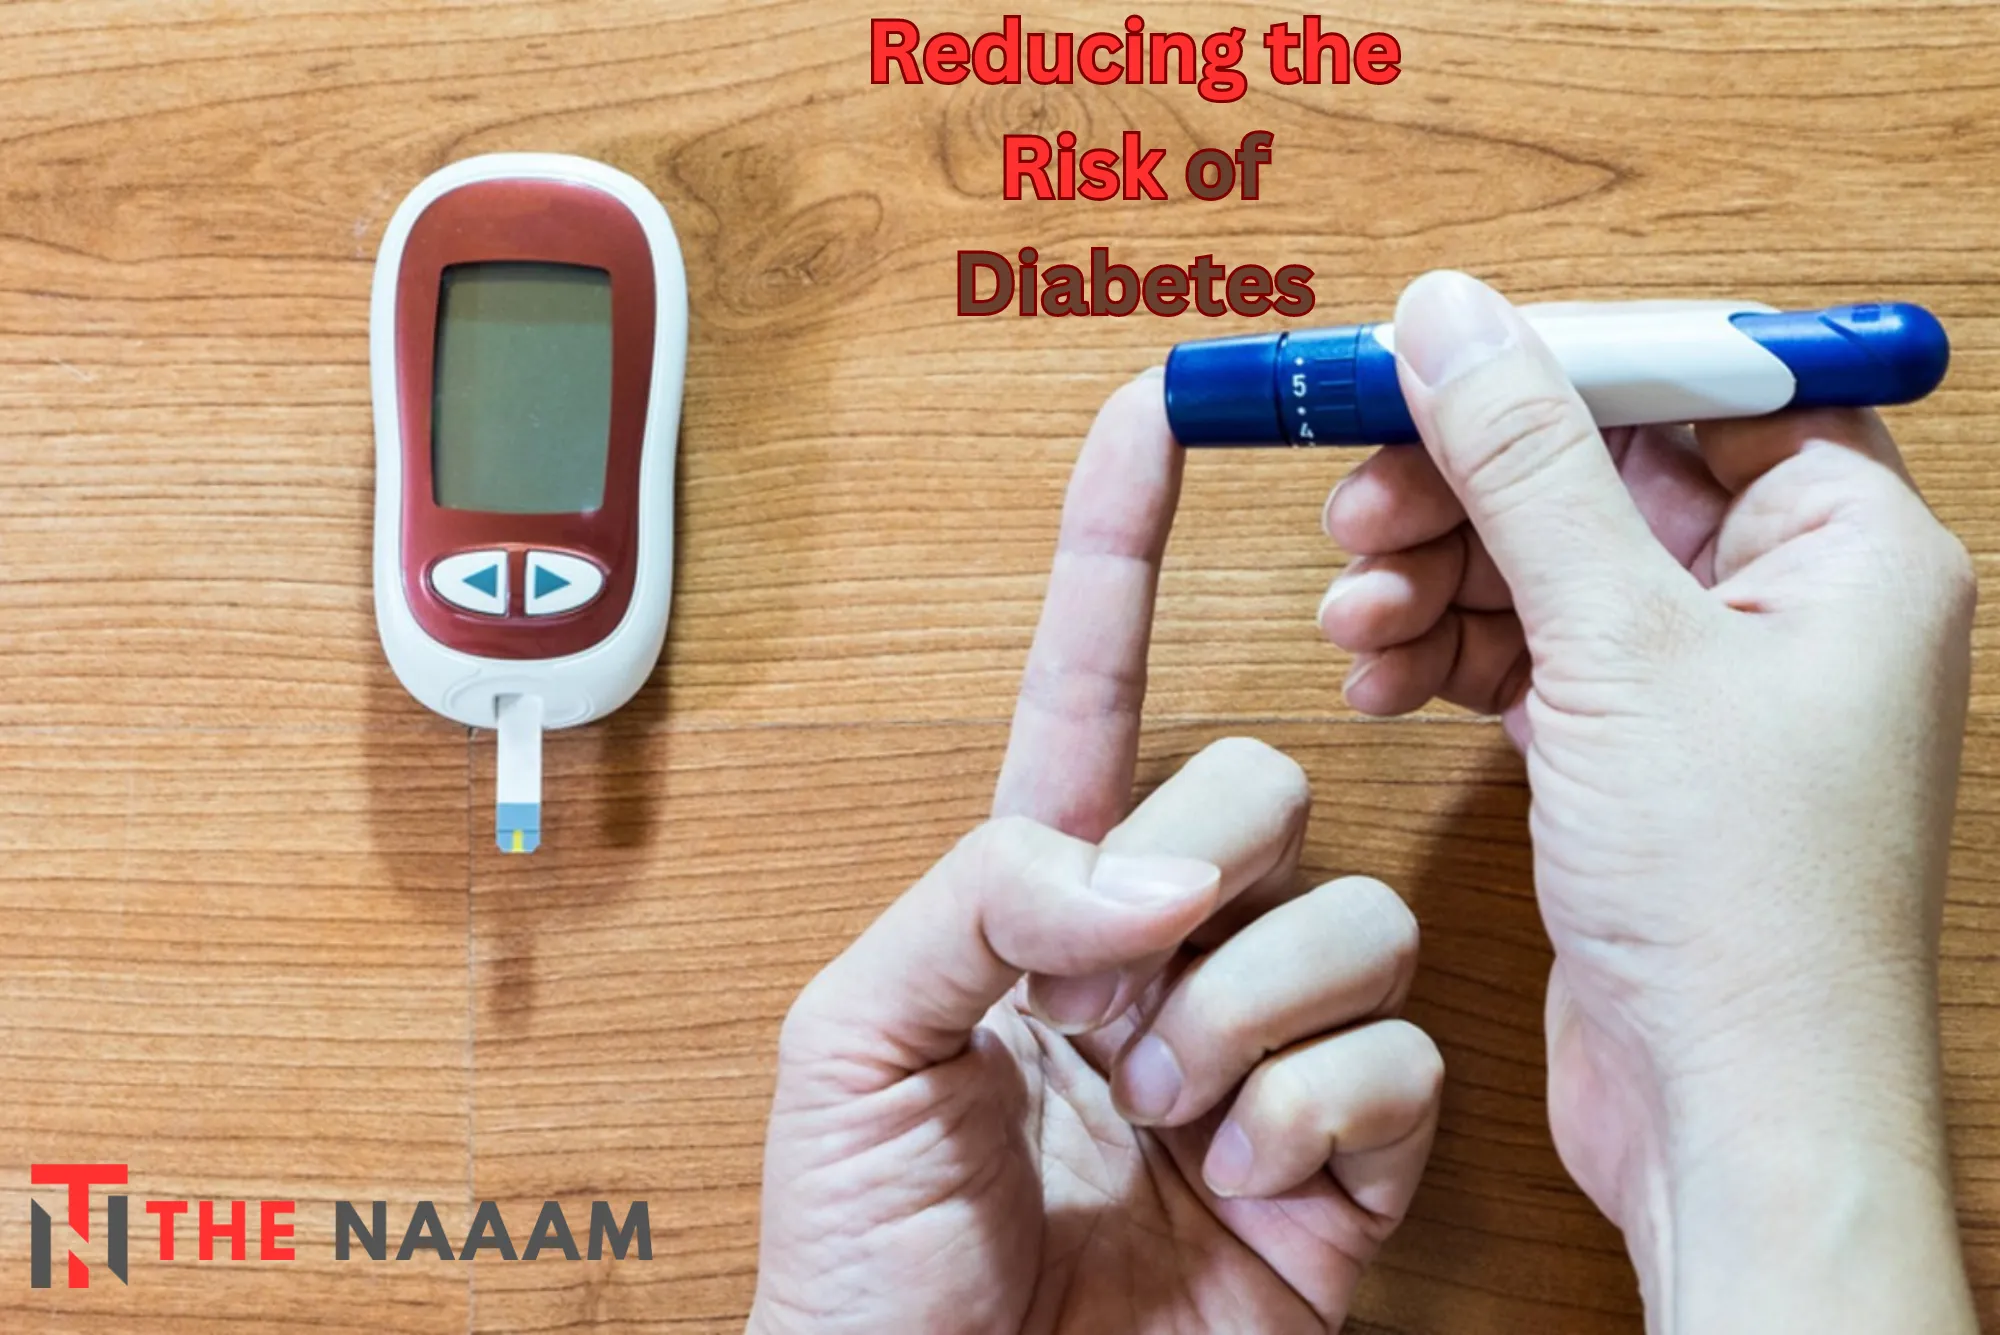 Reducing the Risk of Diabetes